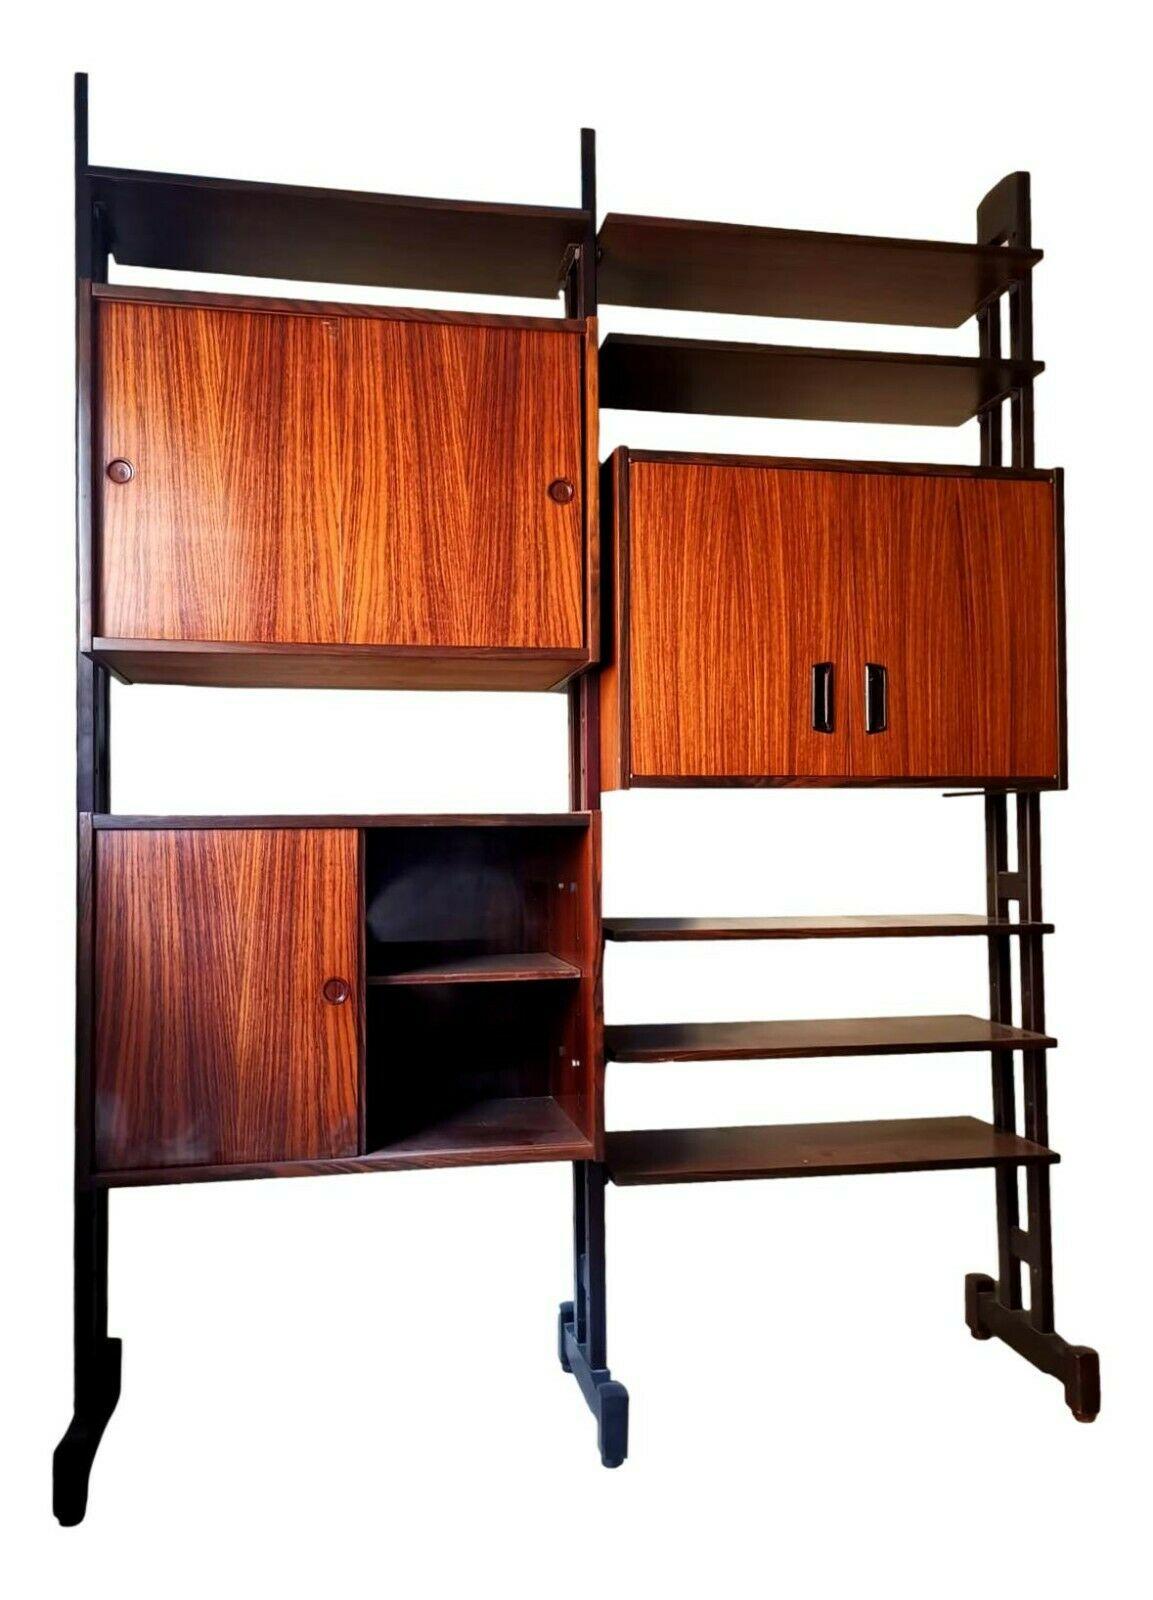 Original 1960s teak bookcase, Vittorio Dassi design, composed of three wooden uprights (not metal!), 3 closed elements of which 2 with sliding doors and one with folding doors, and 6 shelves

all closed parts and shelves can be positioned at